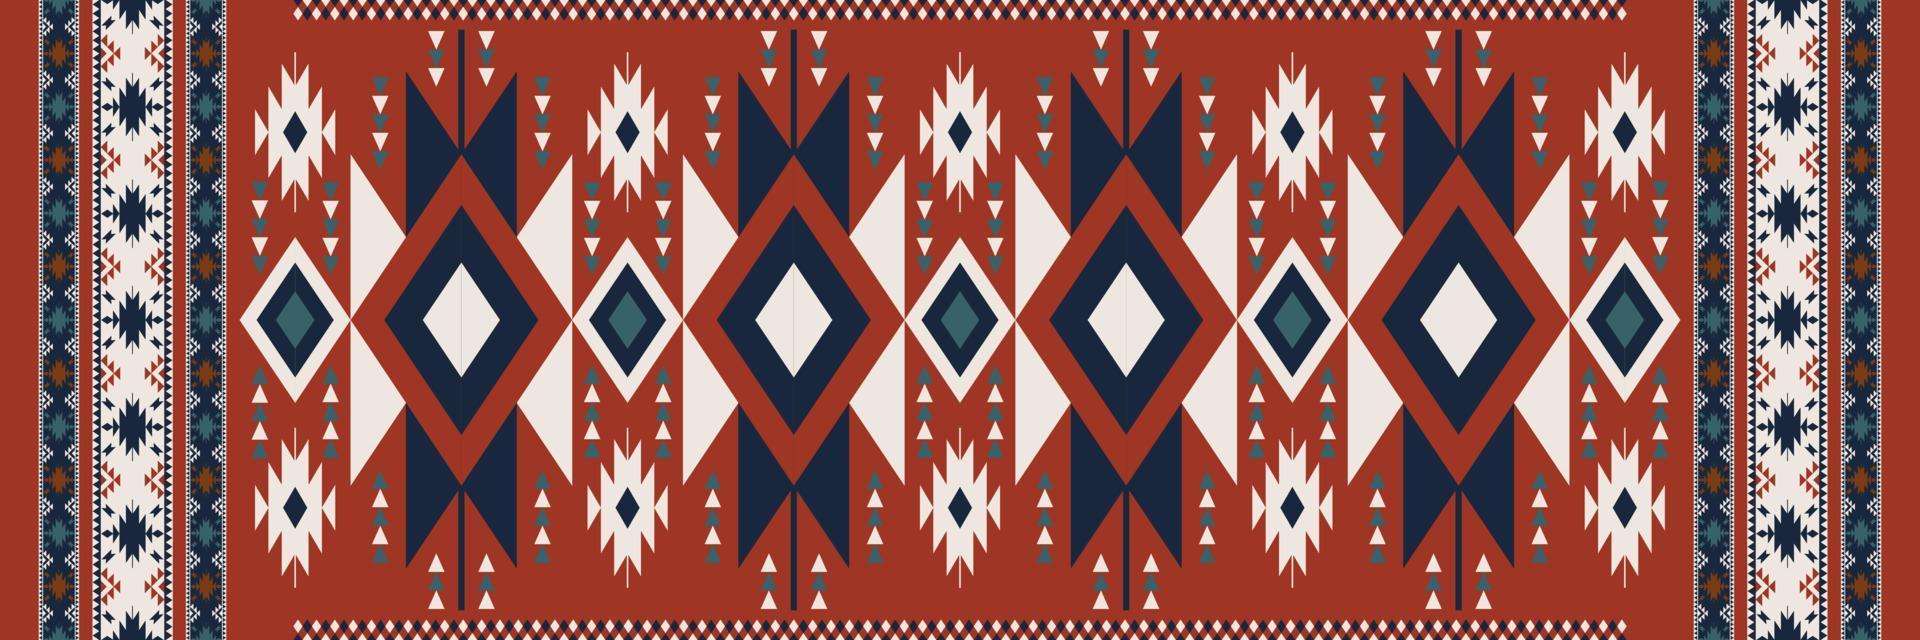 Aztec Navajo pattern. Ethnic boho geometric pattern. Ethnic tribal southwest pattern use for carpet, area rugs, tapestry, mat, bed runner, tablecloth or home interior decoration elements. vector